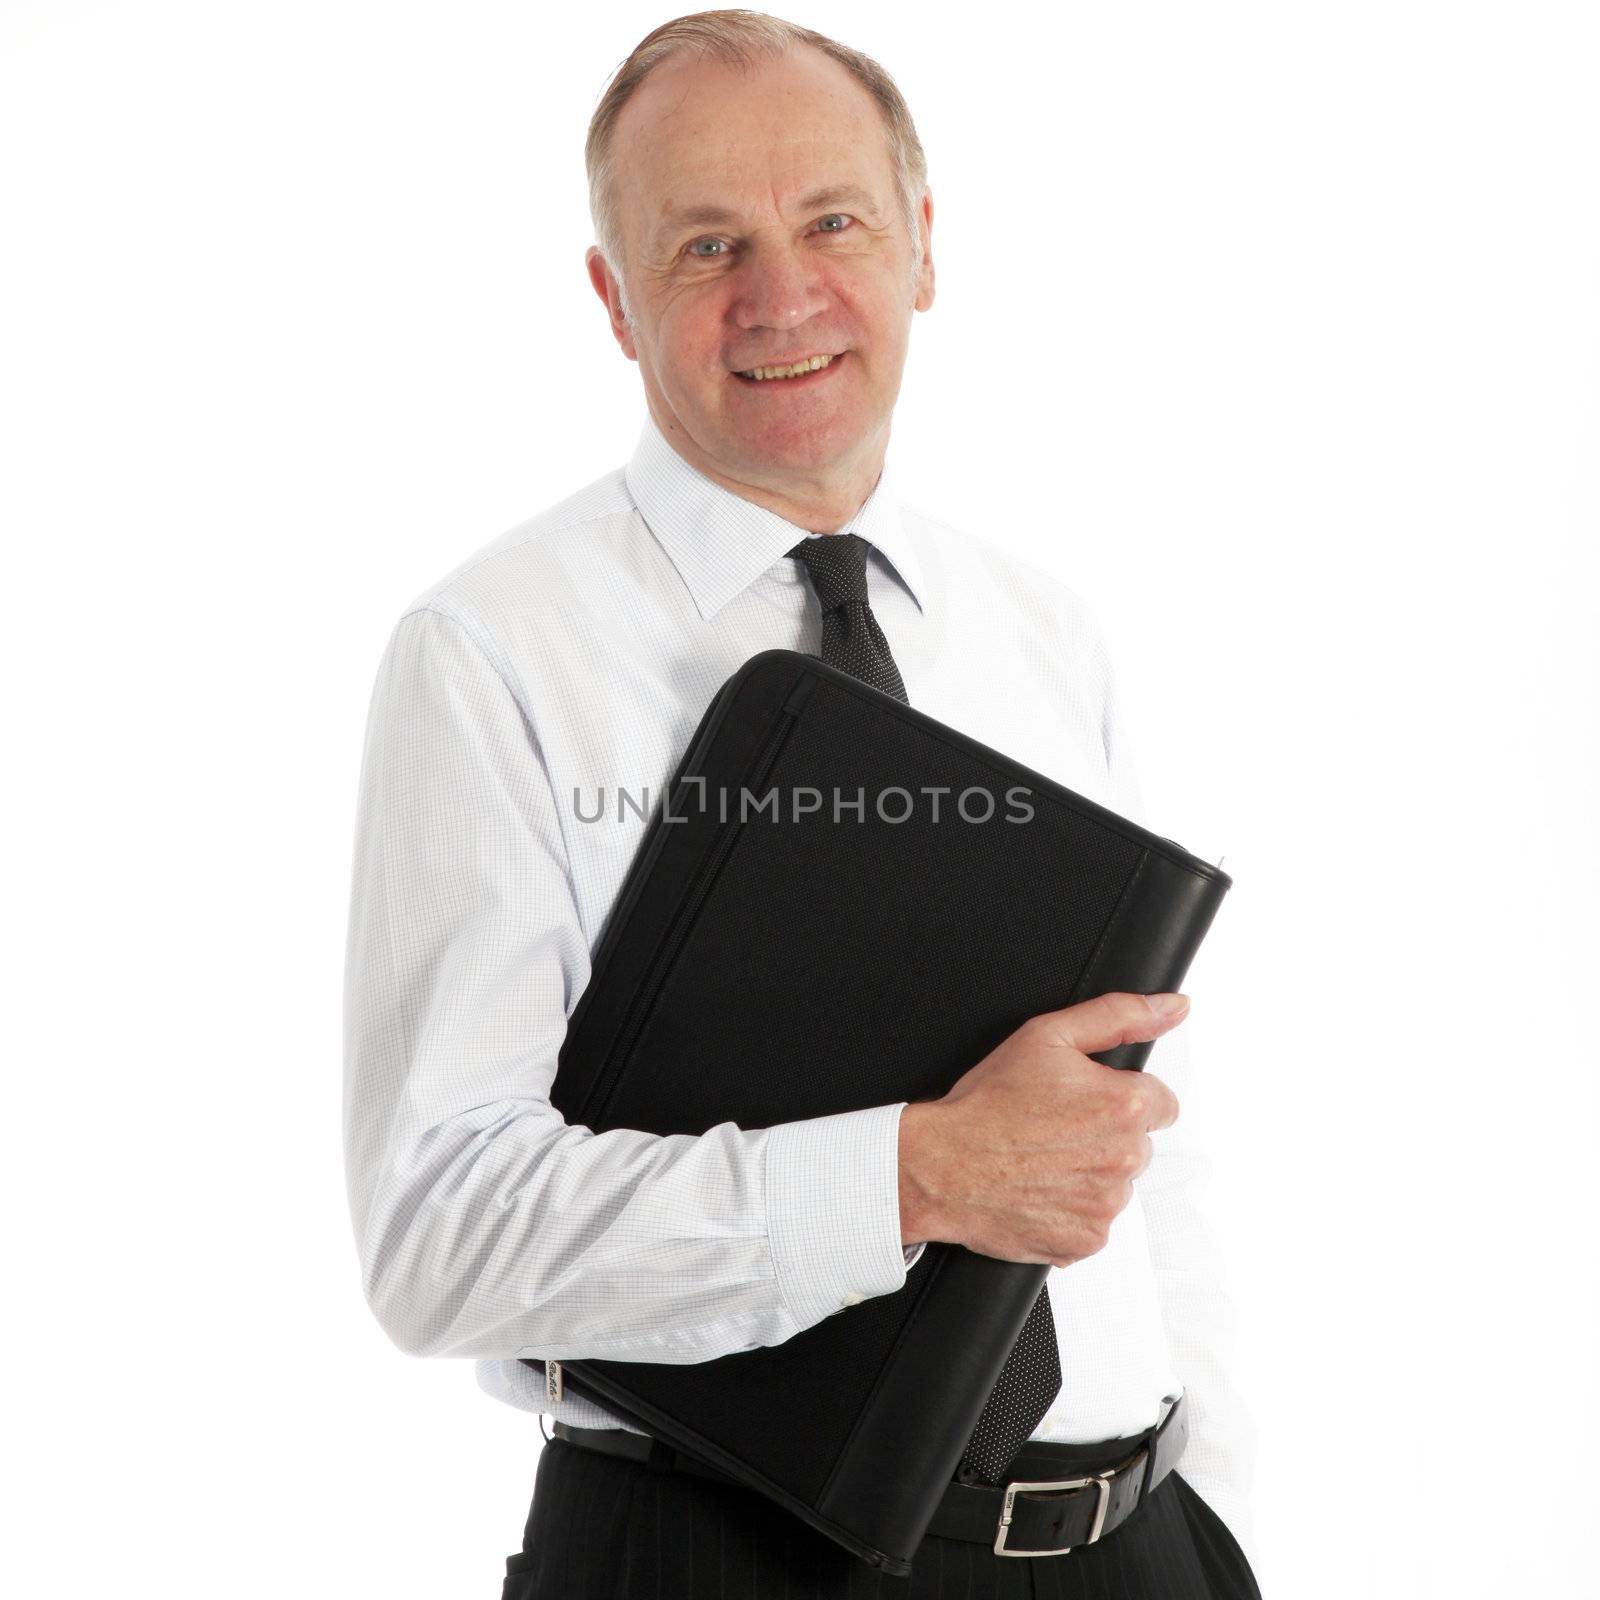 Friendly middle-aged business executive in his shirtsleeves smiling at the camera with a leather portfolio under his arm Friendly middle-aged business executive in his hirtsleeves smiling at the camera with a leather portfolio under his arm 